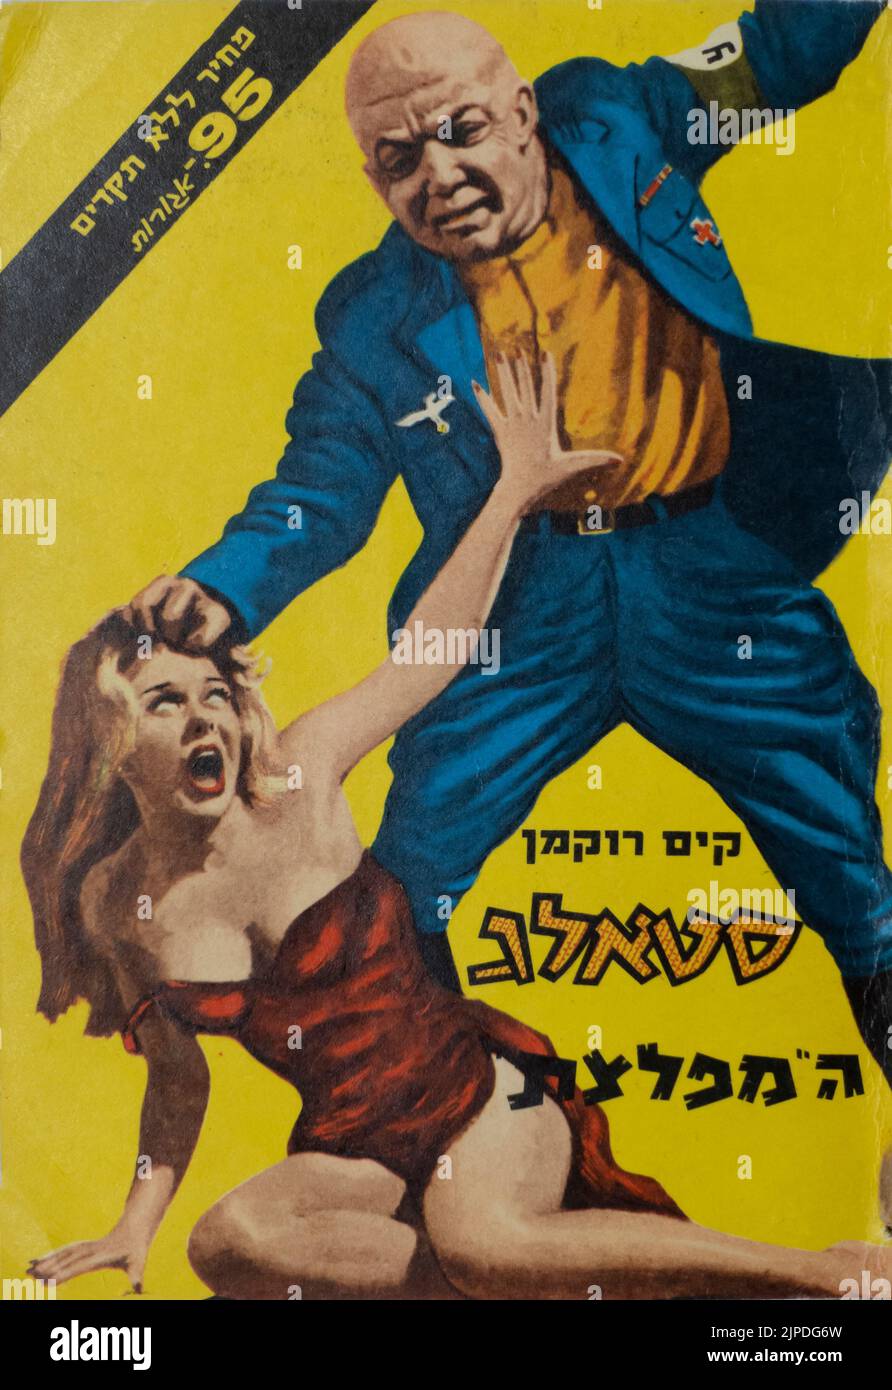 Front cover of Stalag pocket book which shows the sexualization of female SS guards characteristic of the genre, part of the 'Stalag' collection stored at the Israel National Library on the Givat Ram campus of the Hebrew University on August 17, 2022 in Jerusalem, Israel. Stalag were fiction pocket books written by Israeli authors of Nazi themed porno that flourished in the early years of Israel. These books were mainly about German Nazi officers sexually abusing their camp prisoners. Stock Photo